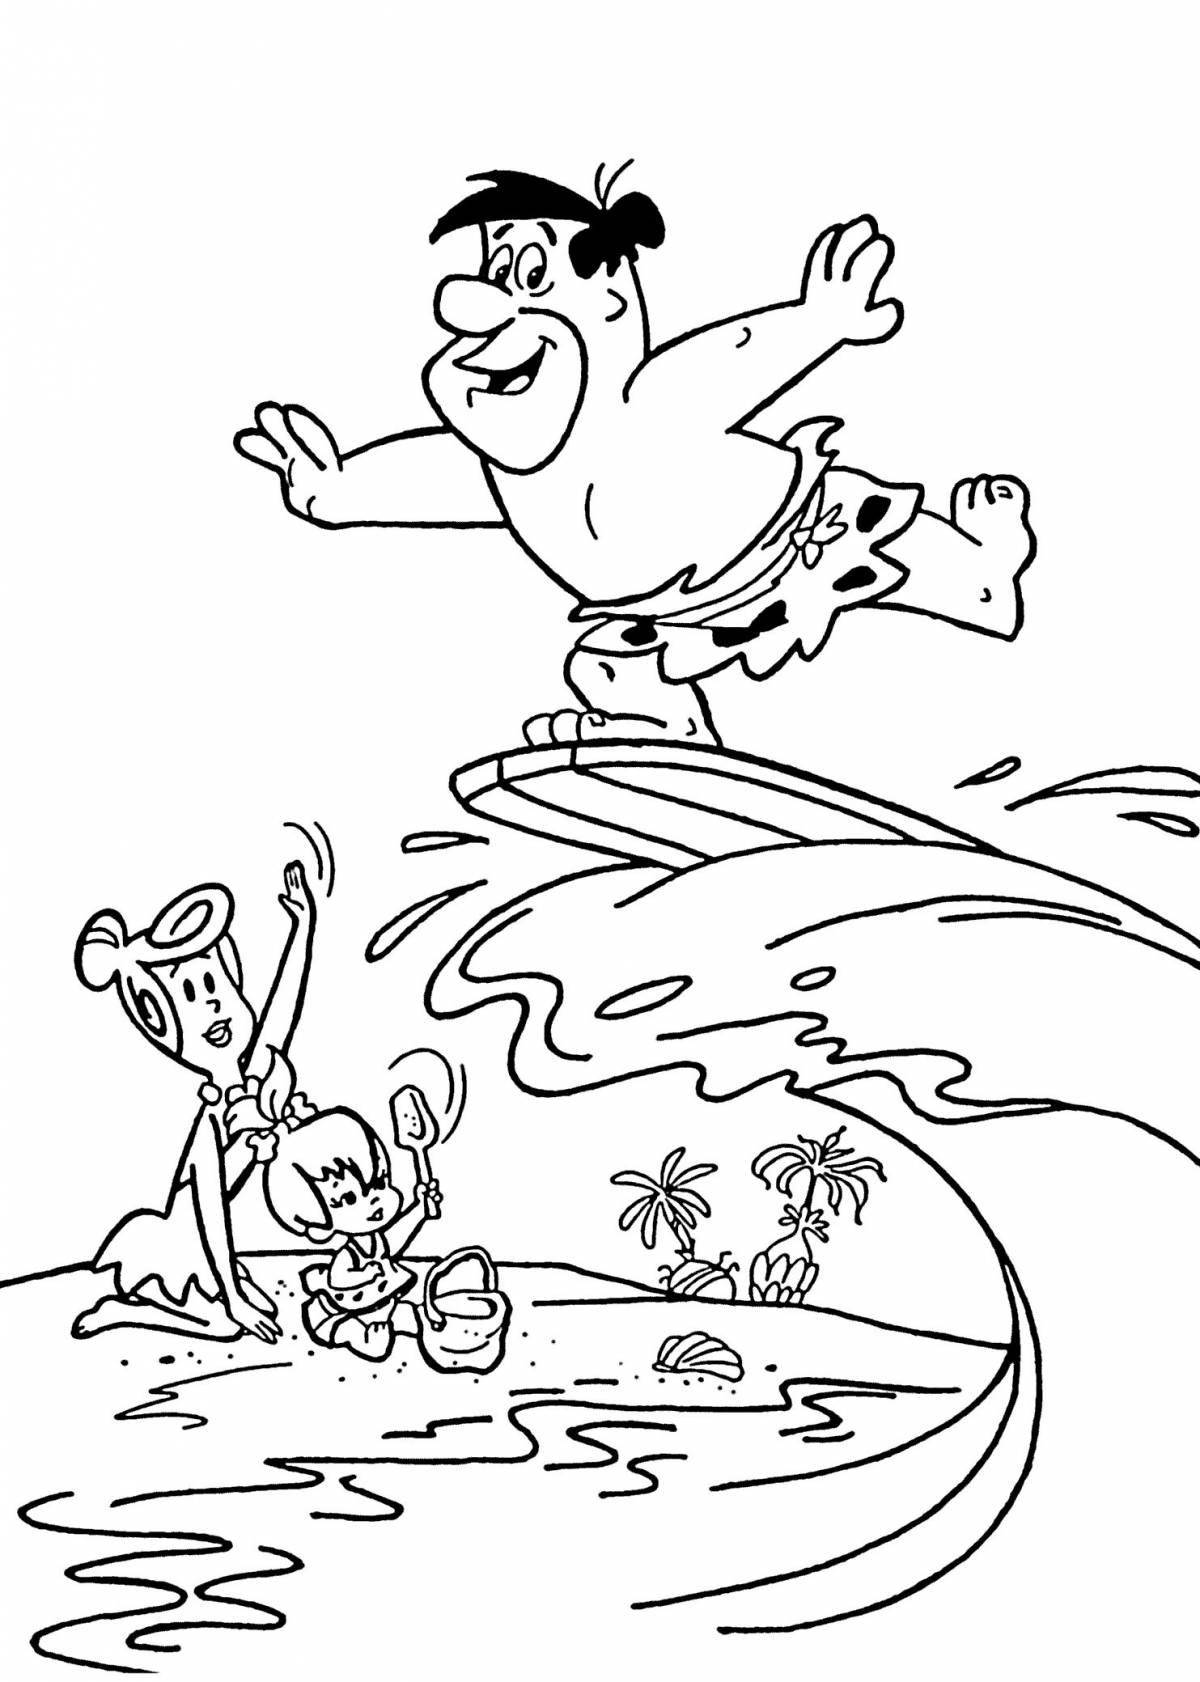 Coloring page nice fred flintstone